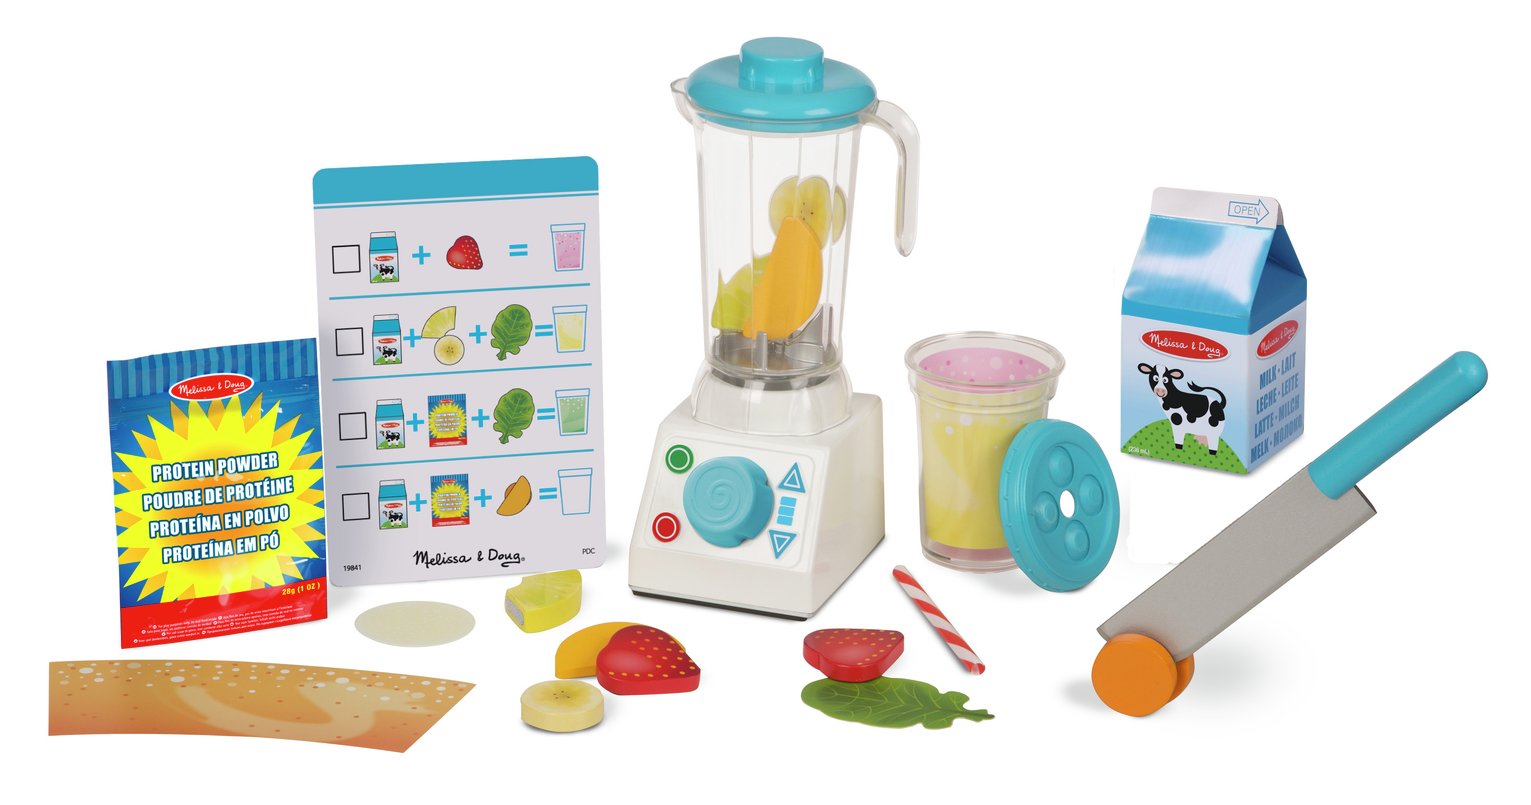 wooden smoothie maker toy